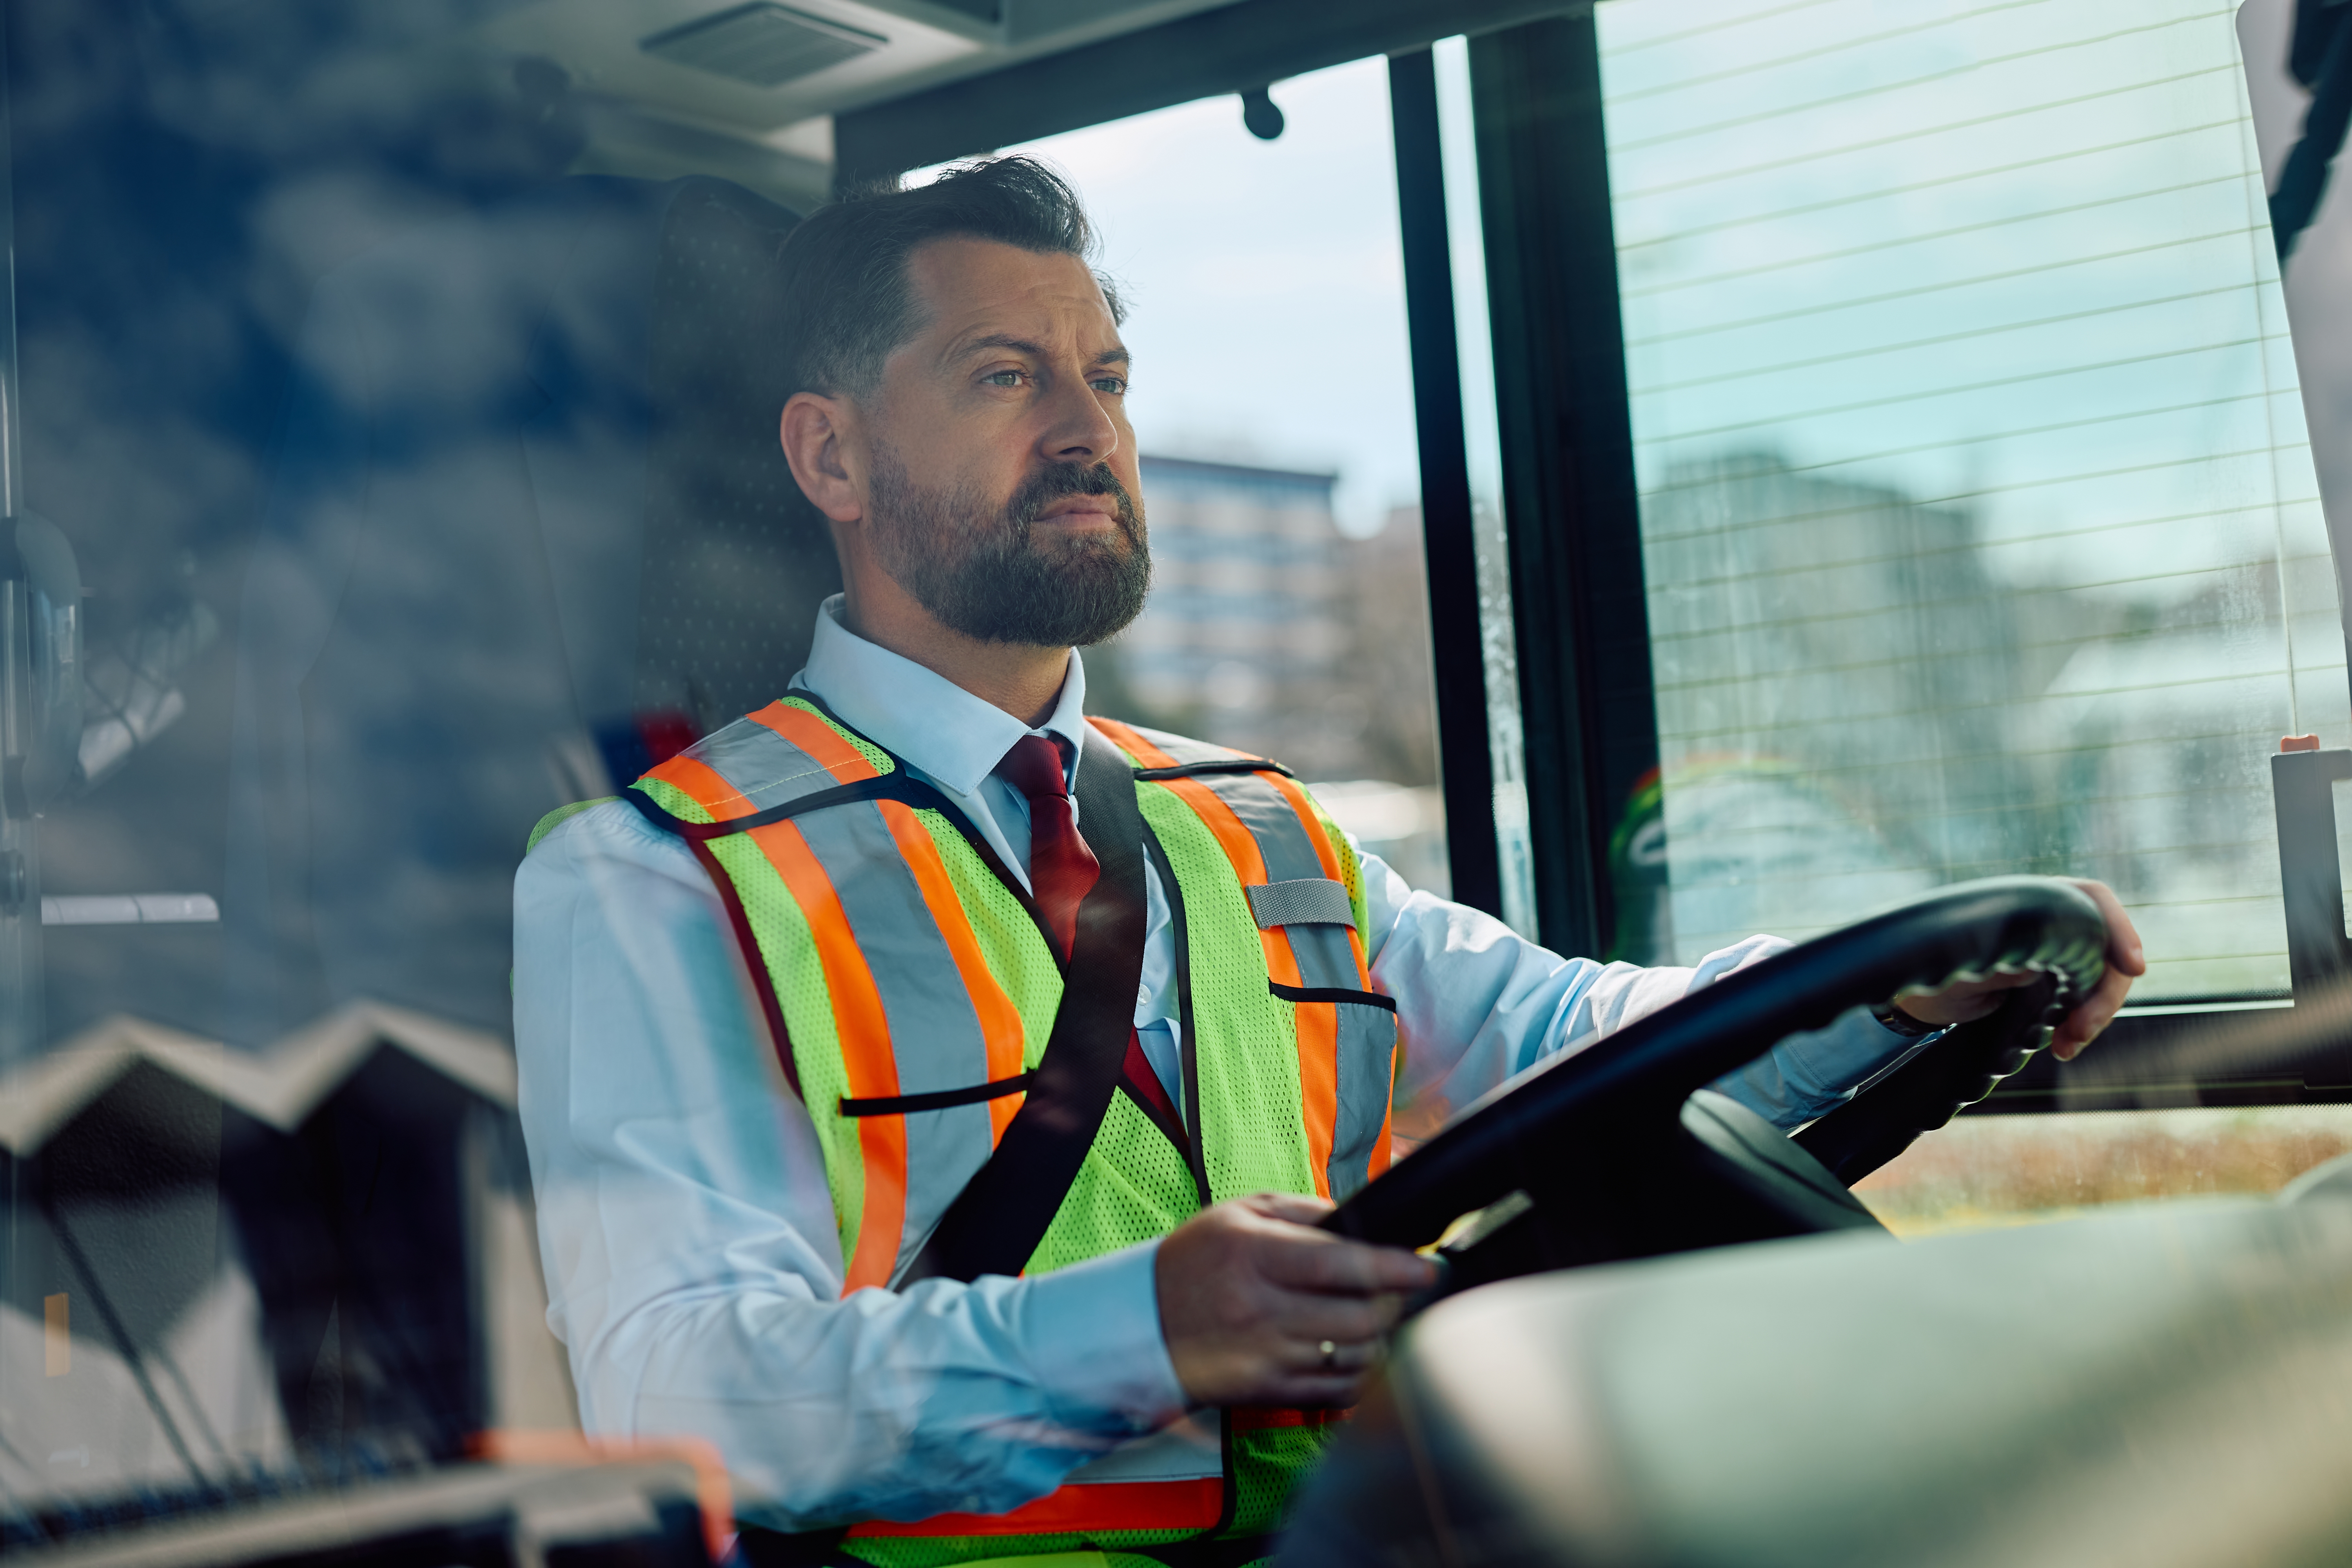 Bus driver driving a bus | Source: Shutterstock